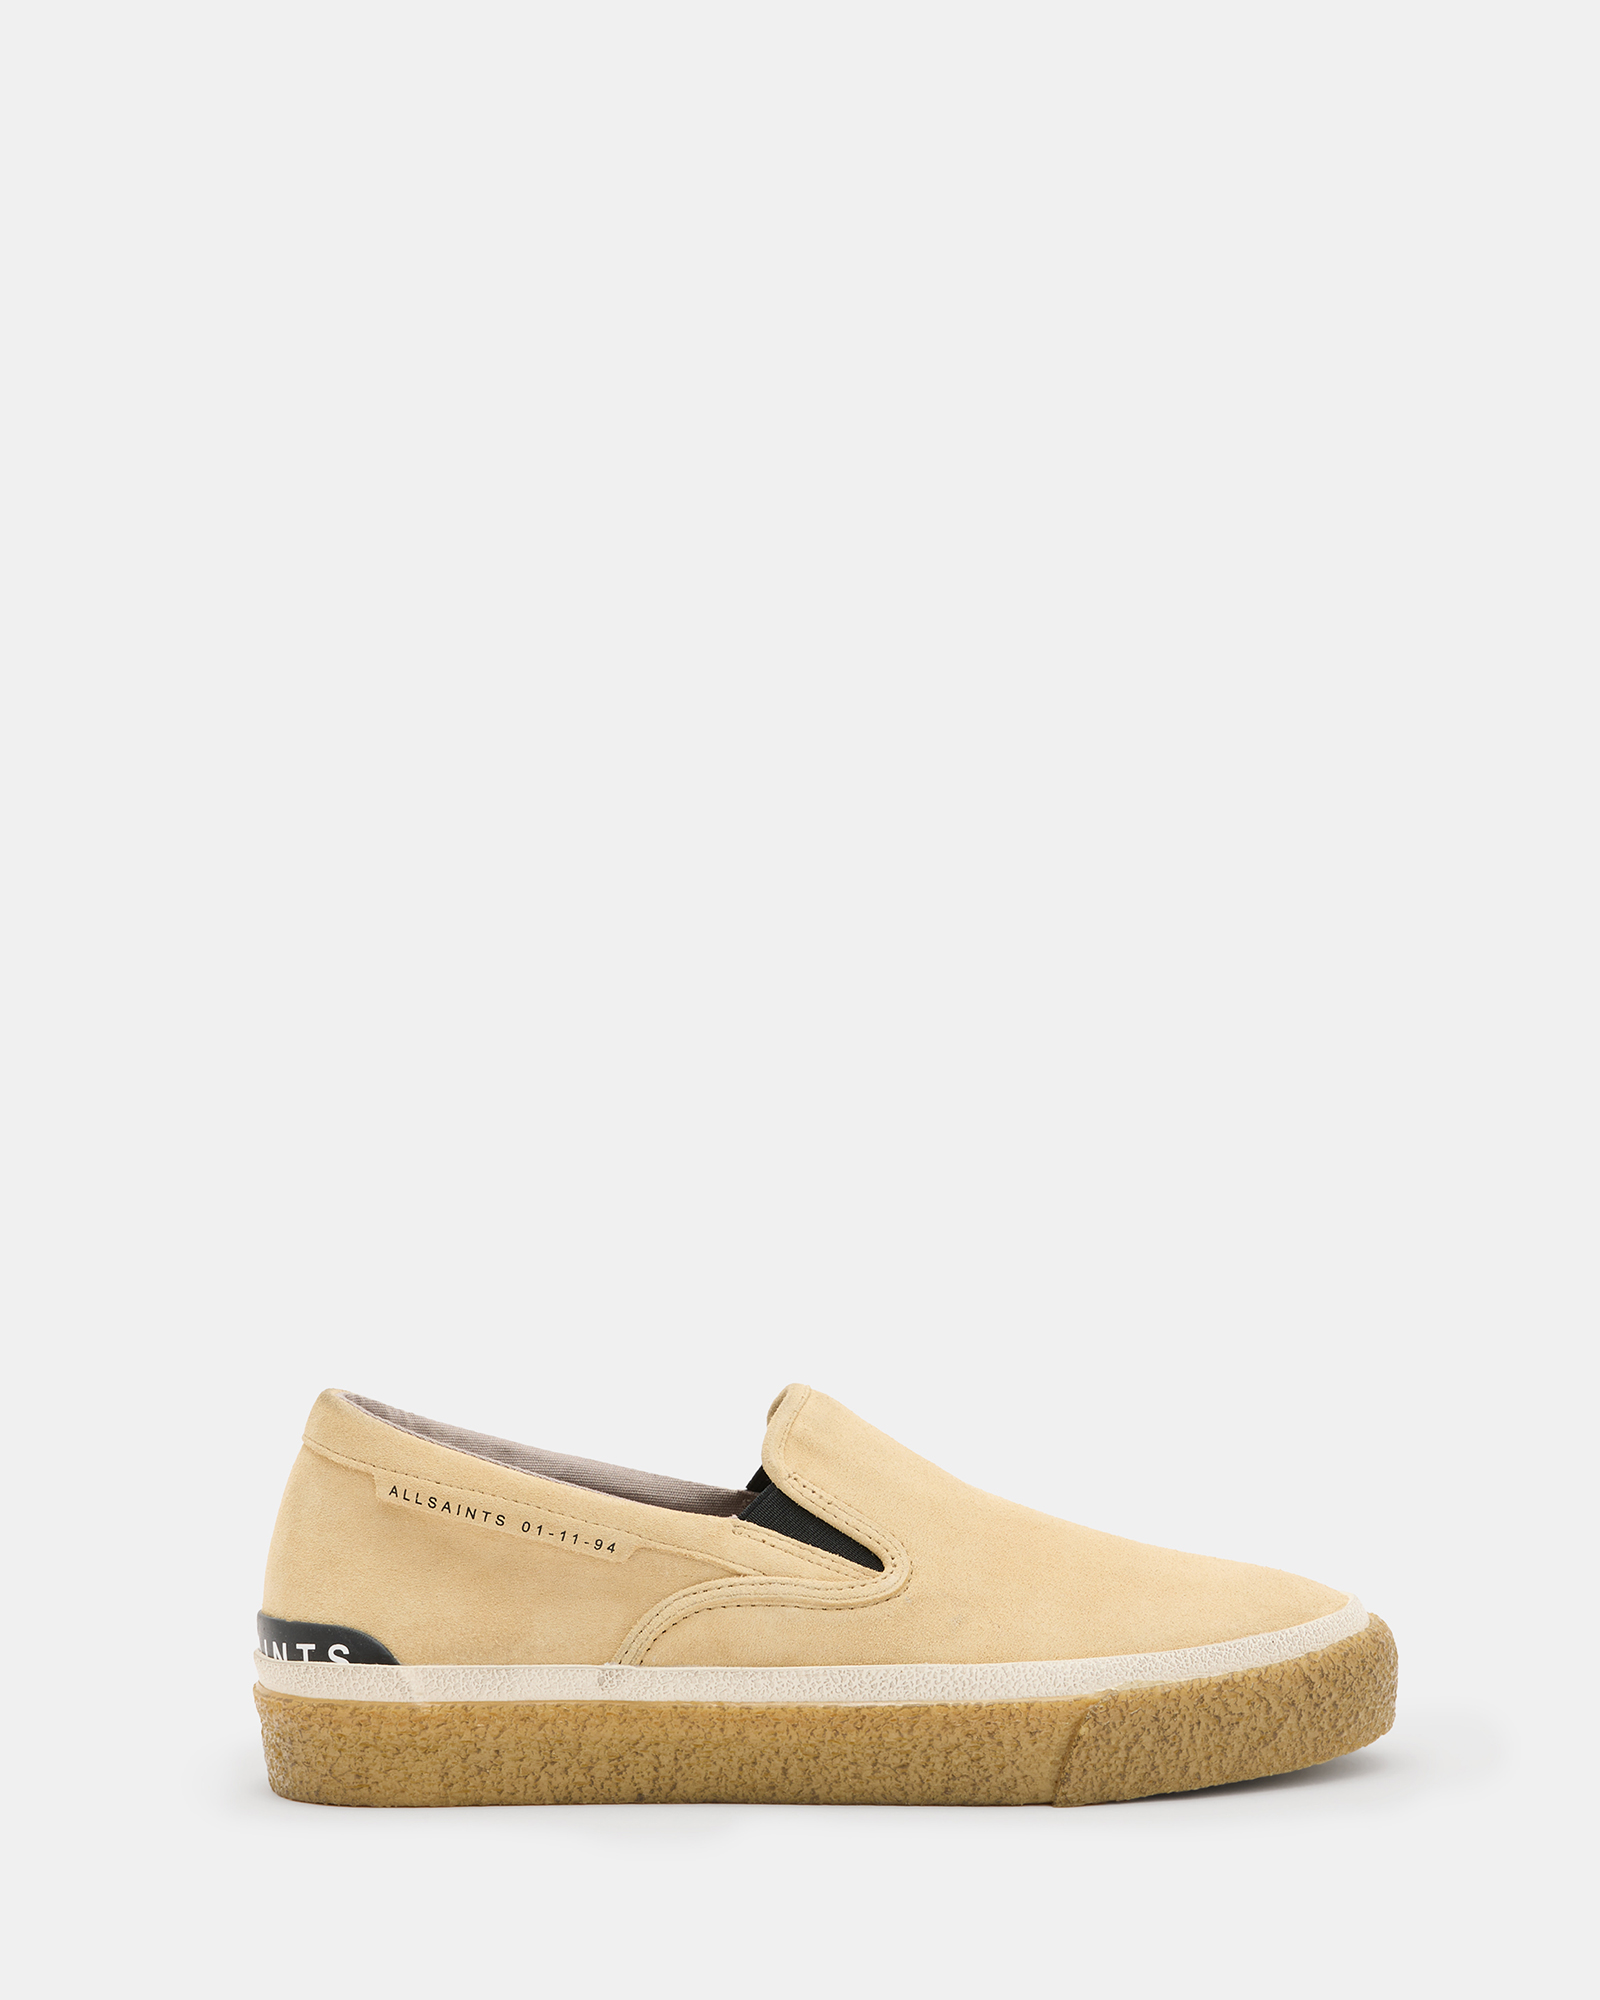 AllSaints Navaho Suede Slip On Trainers,, Sand